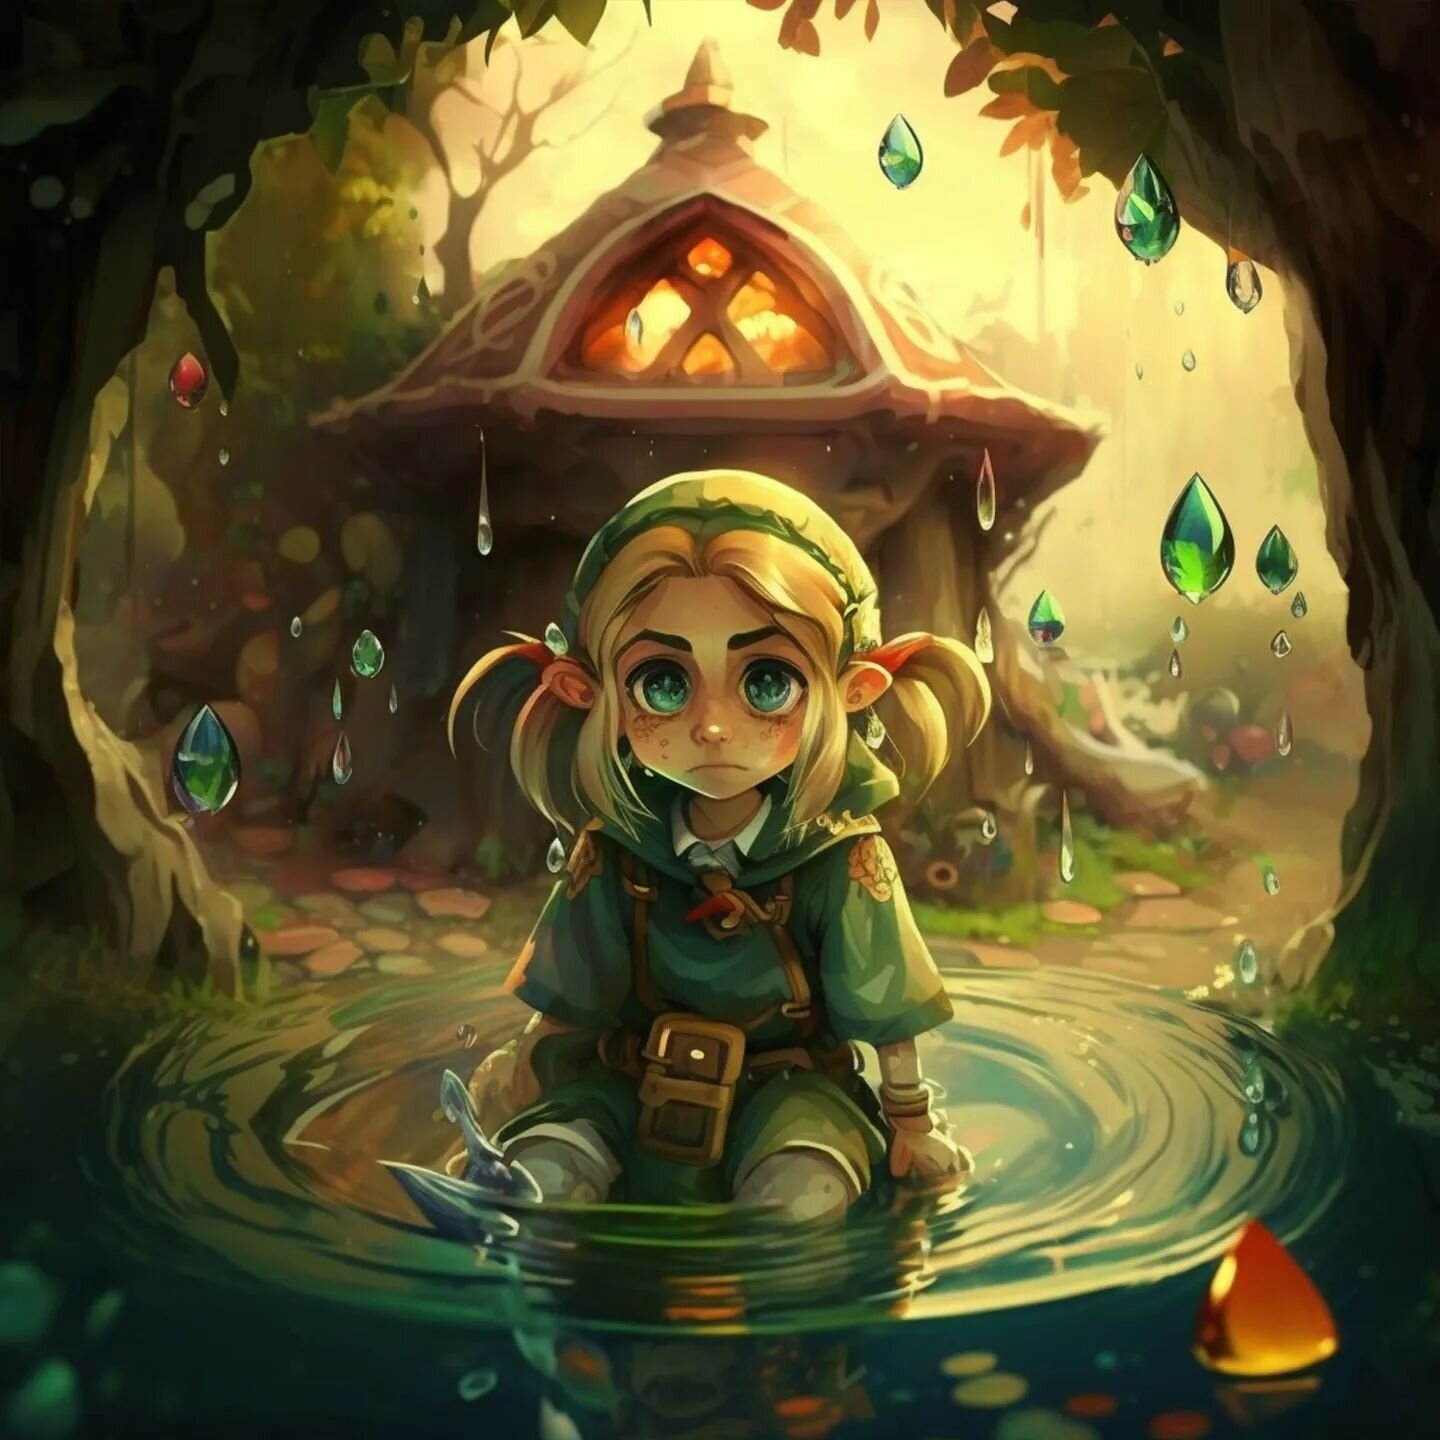 Release nr two on my triple release day is from my lo-fi project @circa83music! I did a cover of &quot;Great Fairy's Fountain&quot; from The Legend of Zelda: Ocarina of Time!! Any Zelda fans out there???
Check it!! #dtProducerLife
@zeldanintendo @nin